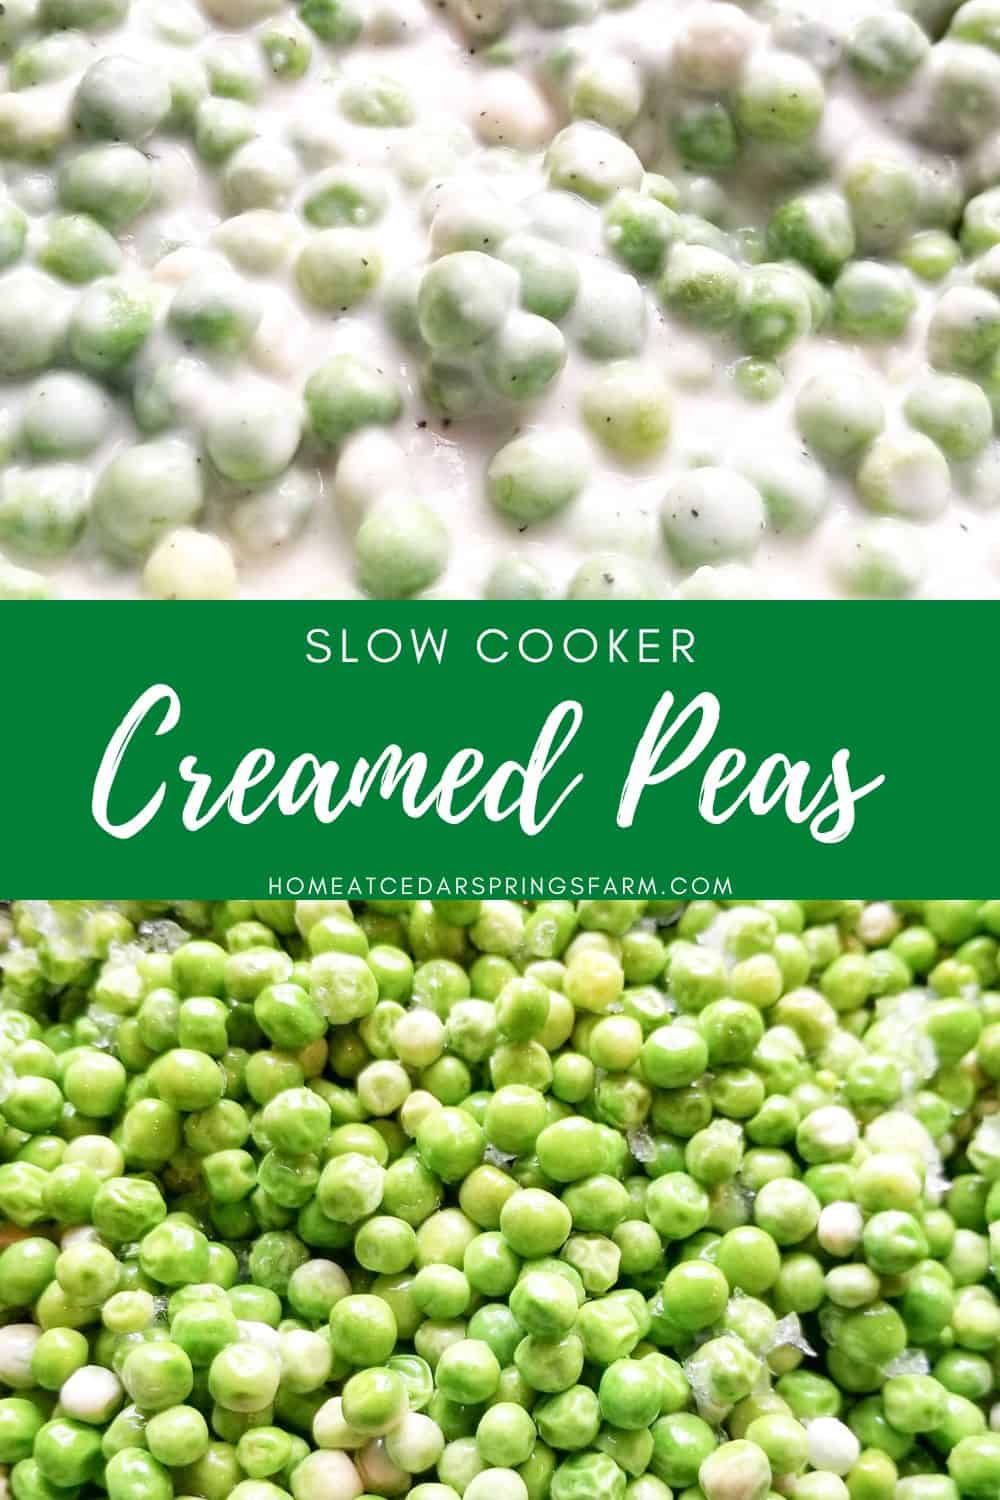 Creamed Peas before and after pictures with text overlay.